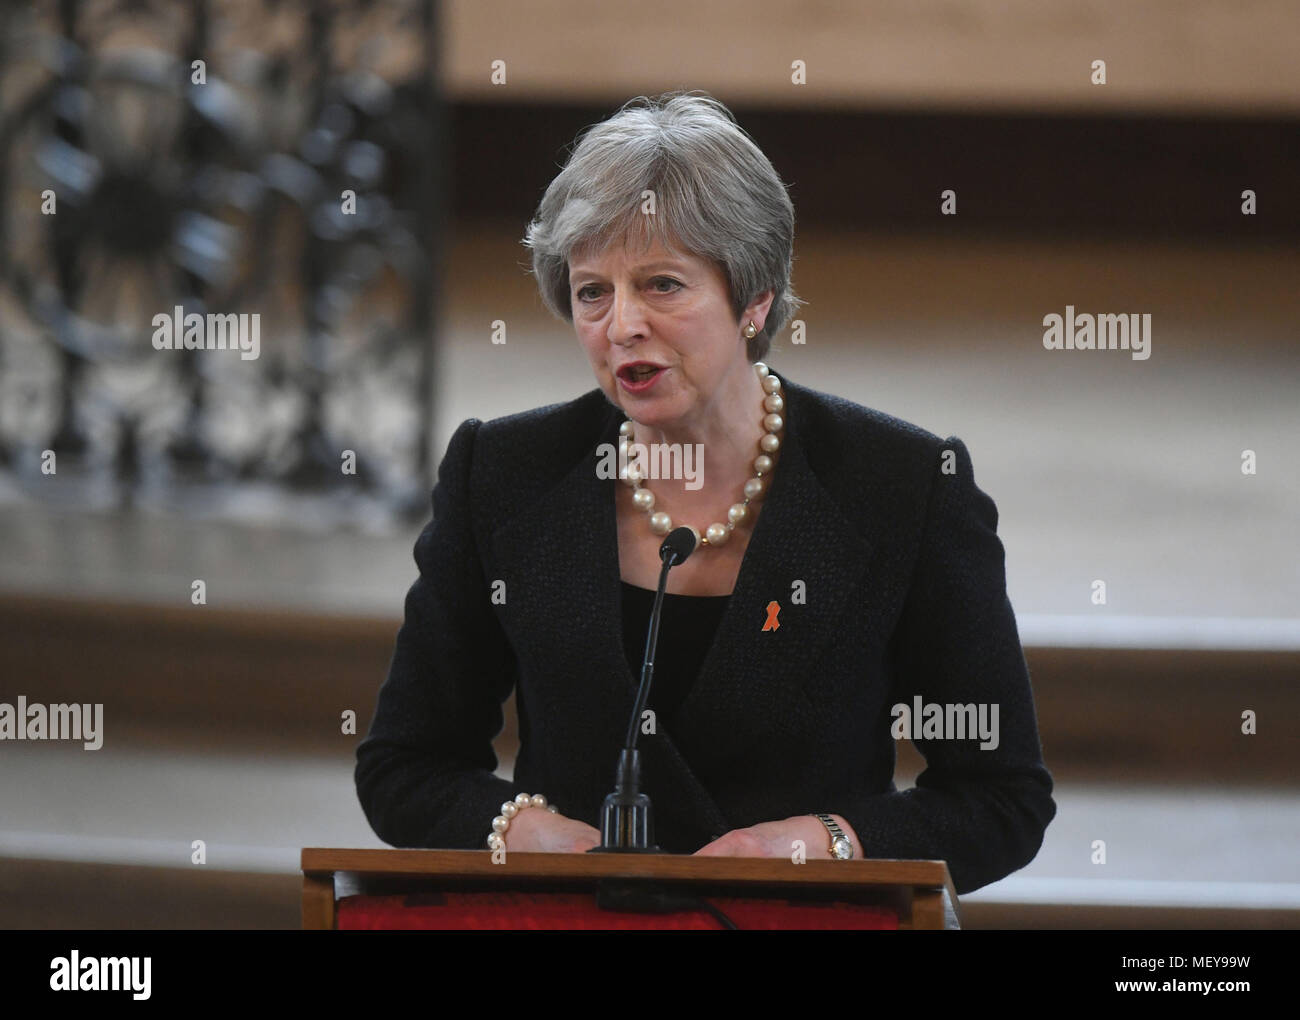 Prime Minister Theresa May speaking during the memorial service at St Martin-in-the-Fields in Trafalgar Square, London to commemorate the 25th anniversary of the murder of Stephen Lawrence. Stock Photo